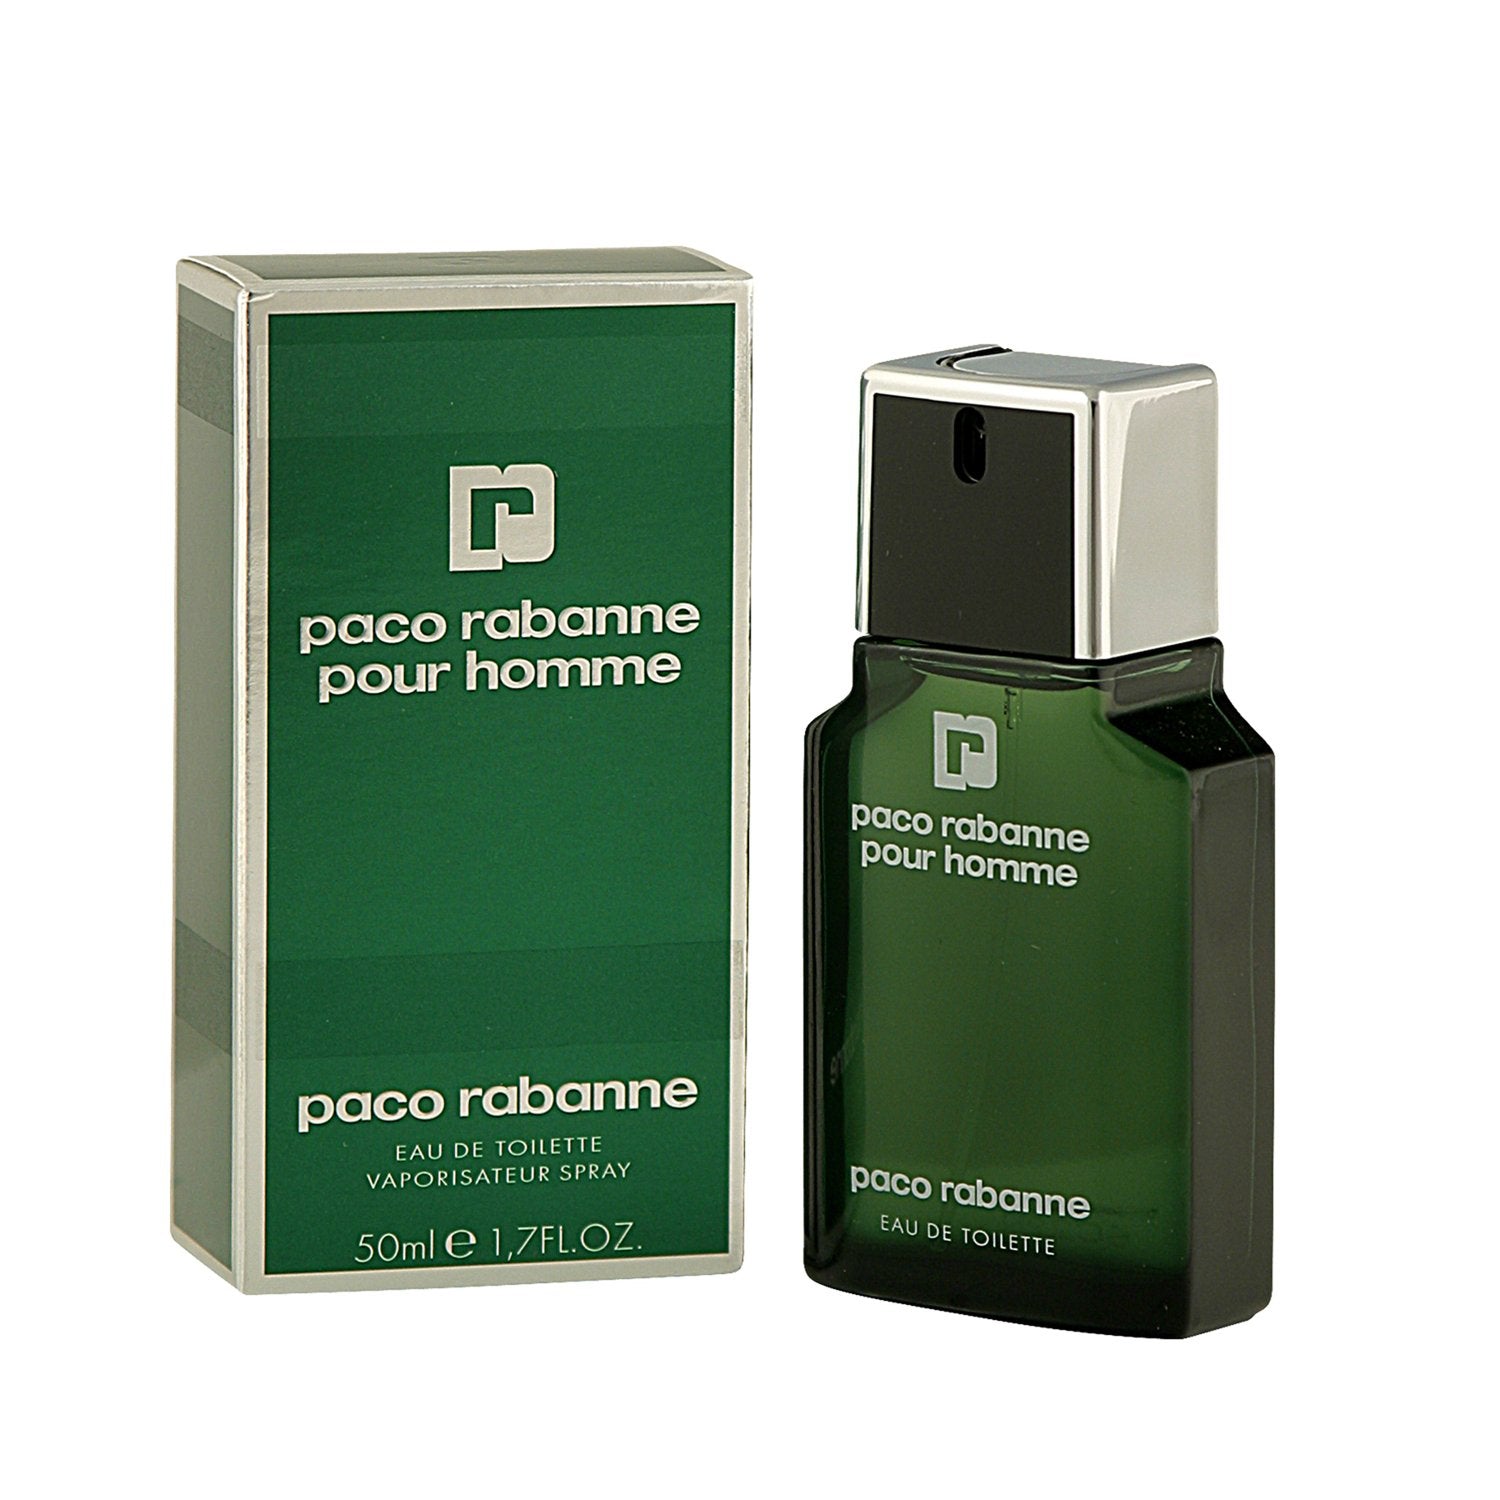 Homme paco. Paco Rabanne pour homme 50ml EDT. Paco Rabanne men EDT зеленый. Paco Rabanne pour homme 50ml EDT Spray. Духи Paco Rabanne зеленые.